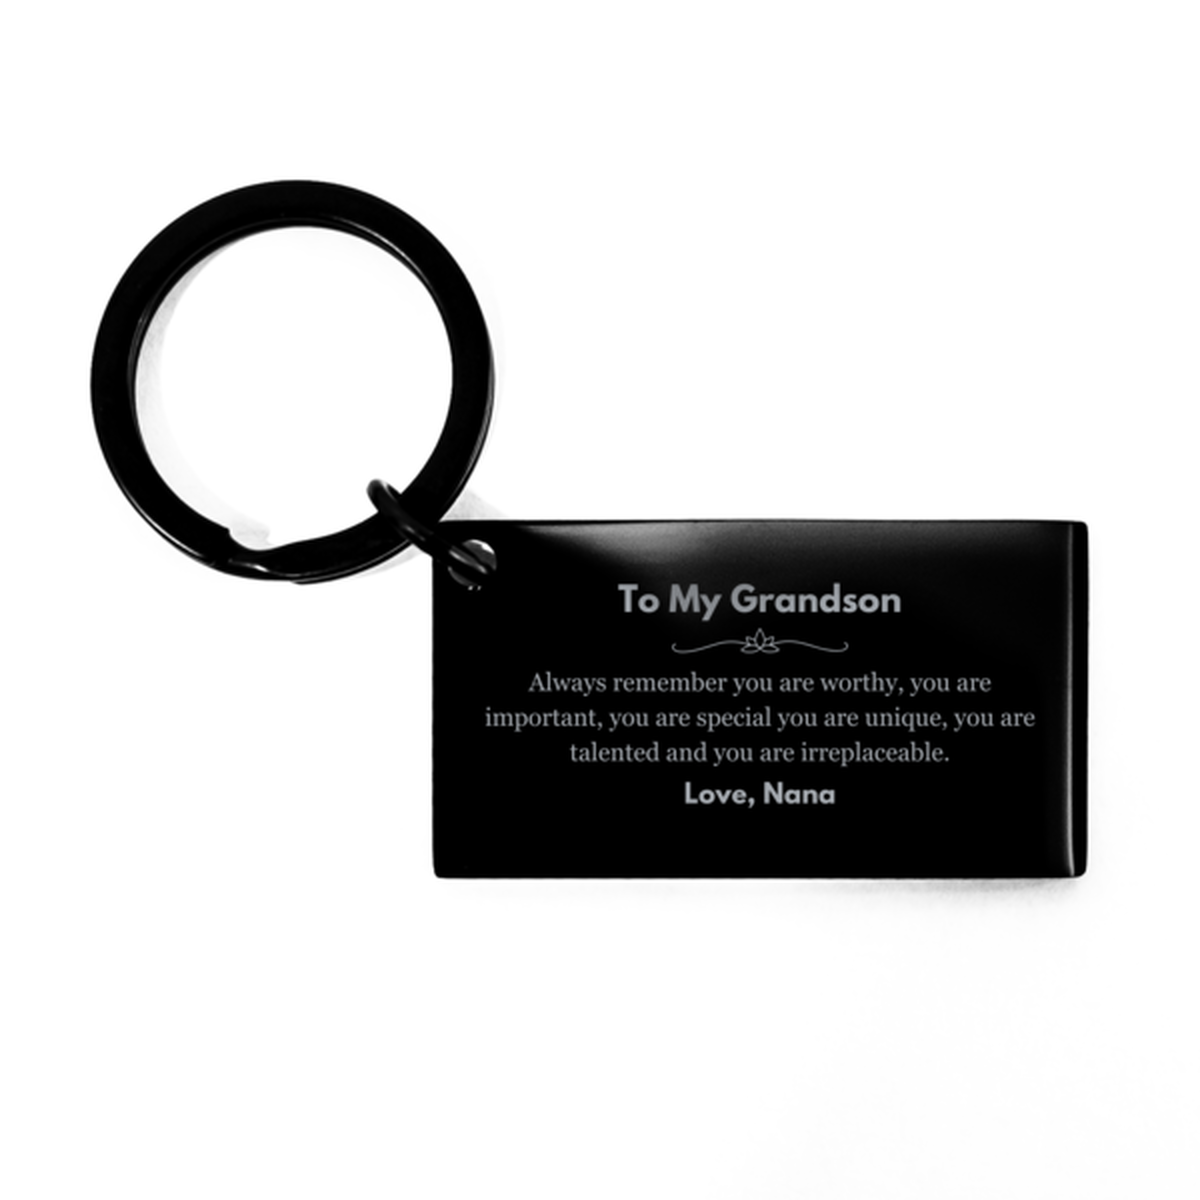 Grandson Birthday Gifts from Nana, Inspirational Keychain for Grandson Christmas Graduation Gifts for Grandson Always remember you are worthy, you are important. Love, Nana